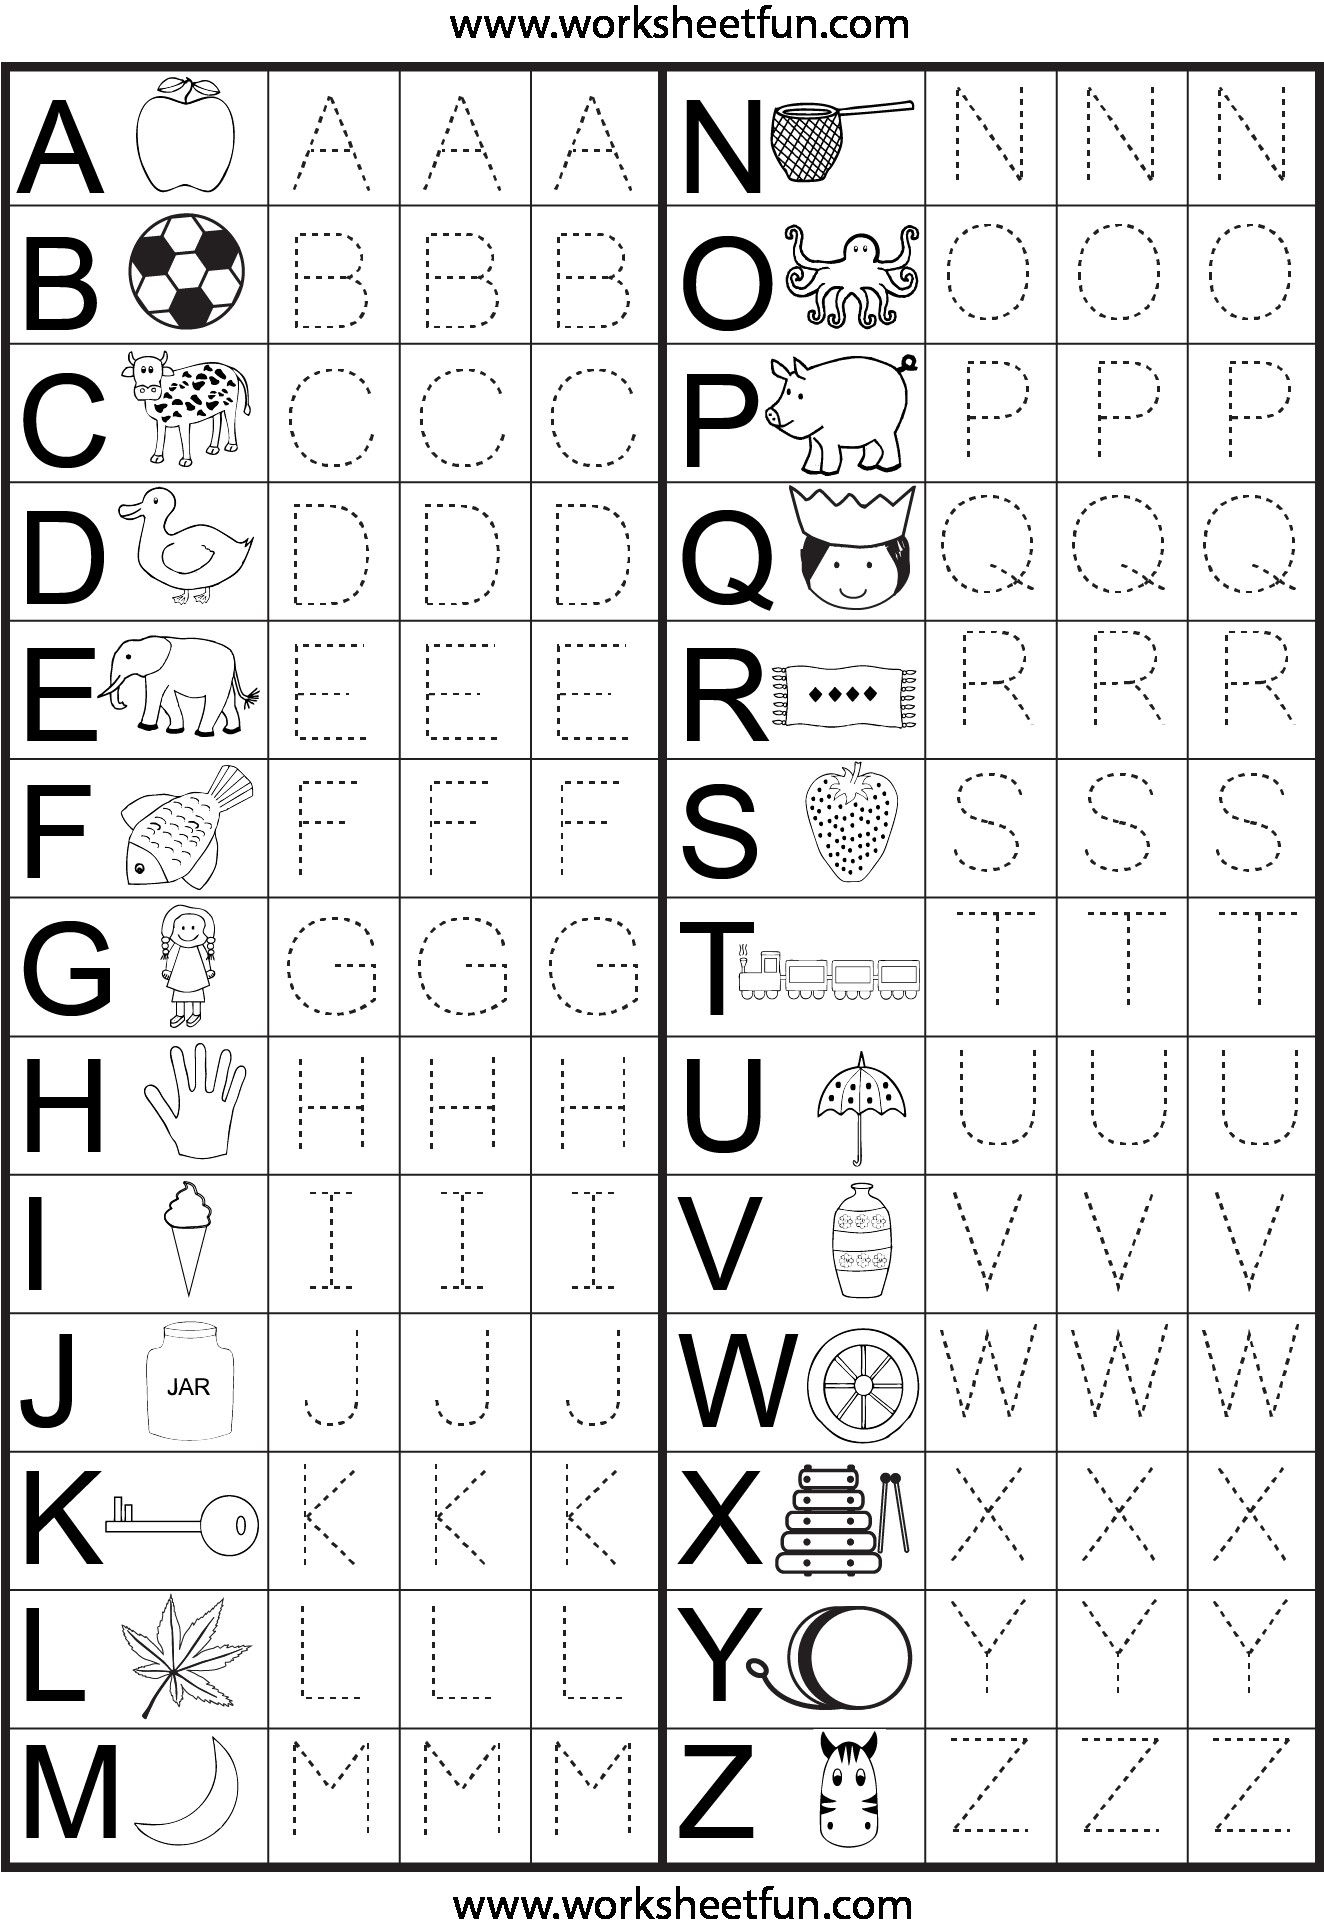 3 Activity Sheets For 4 Year Olds Printable In 2020 within Alphabet Worksheets For 4 Year Olds